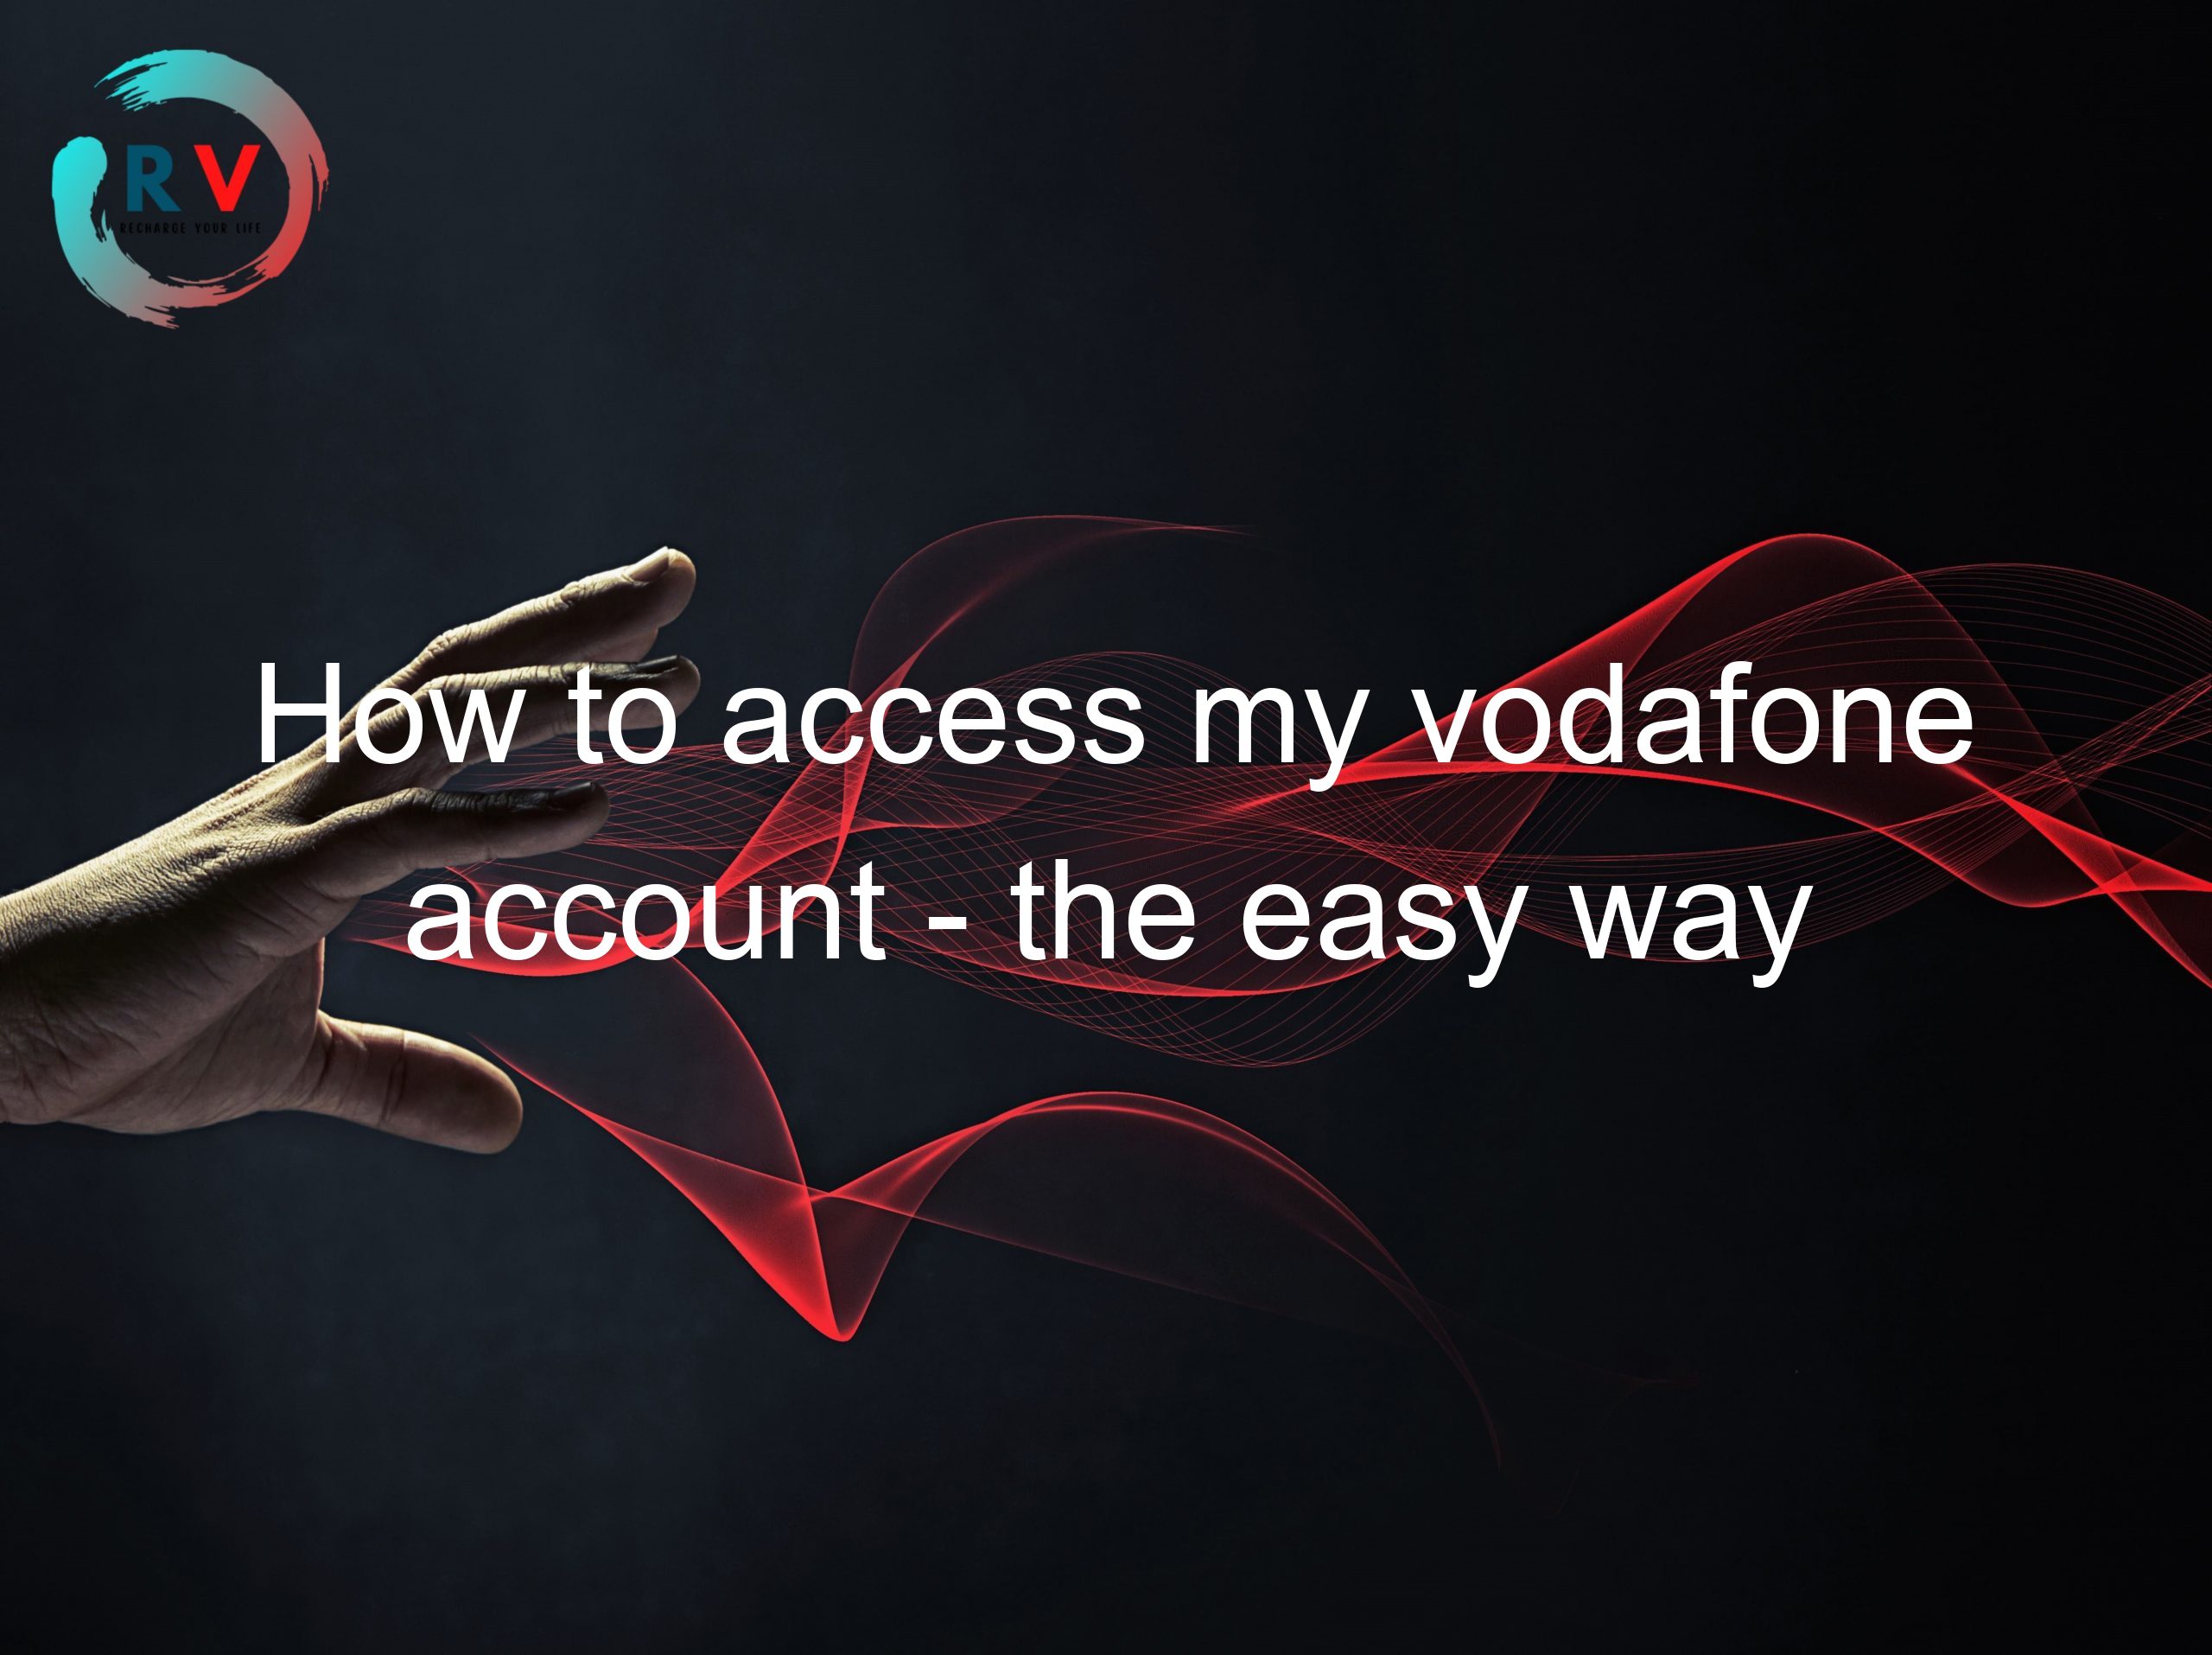 How to access my vodafone account - the easy way